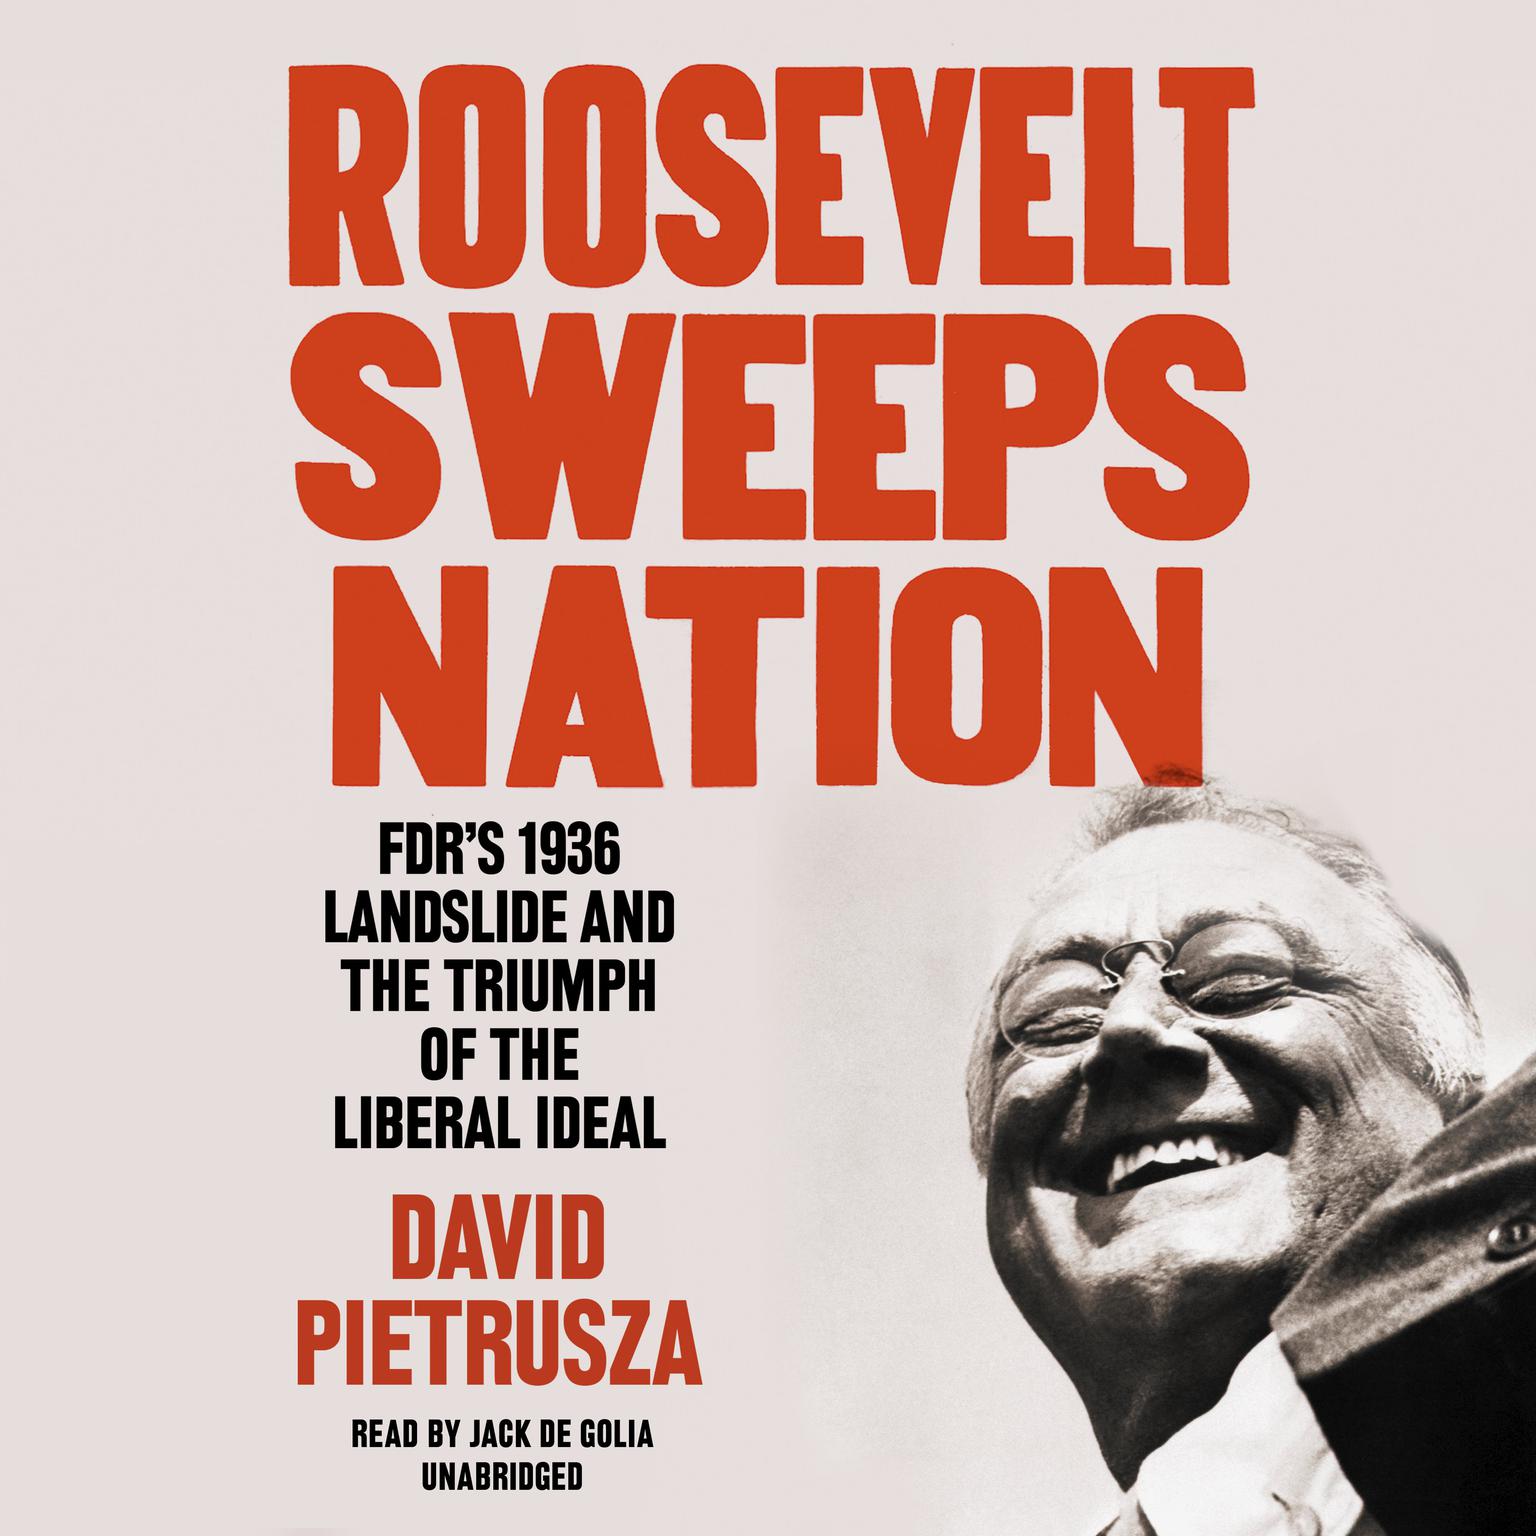 Roosevelt Sweeps Nation: FDR’s 1936 Landslide and the Triumph of the Liberal Ideal Audiobook, by David Pietrusza